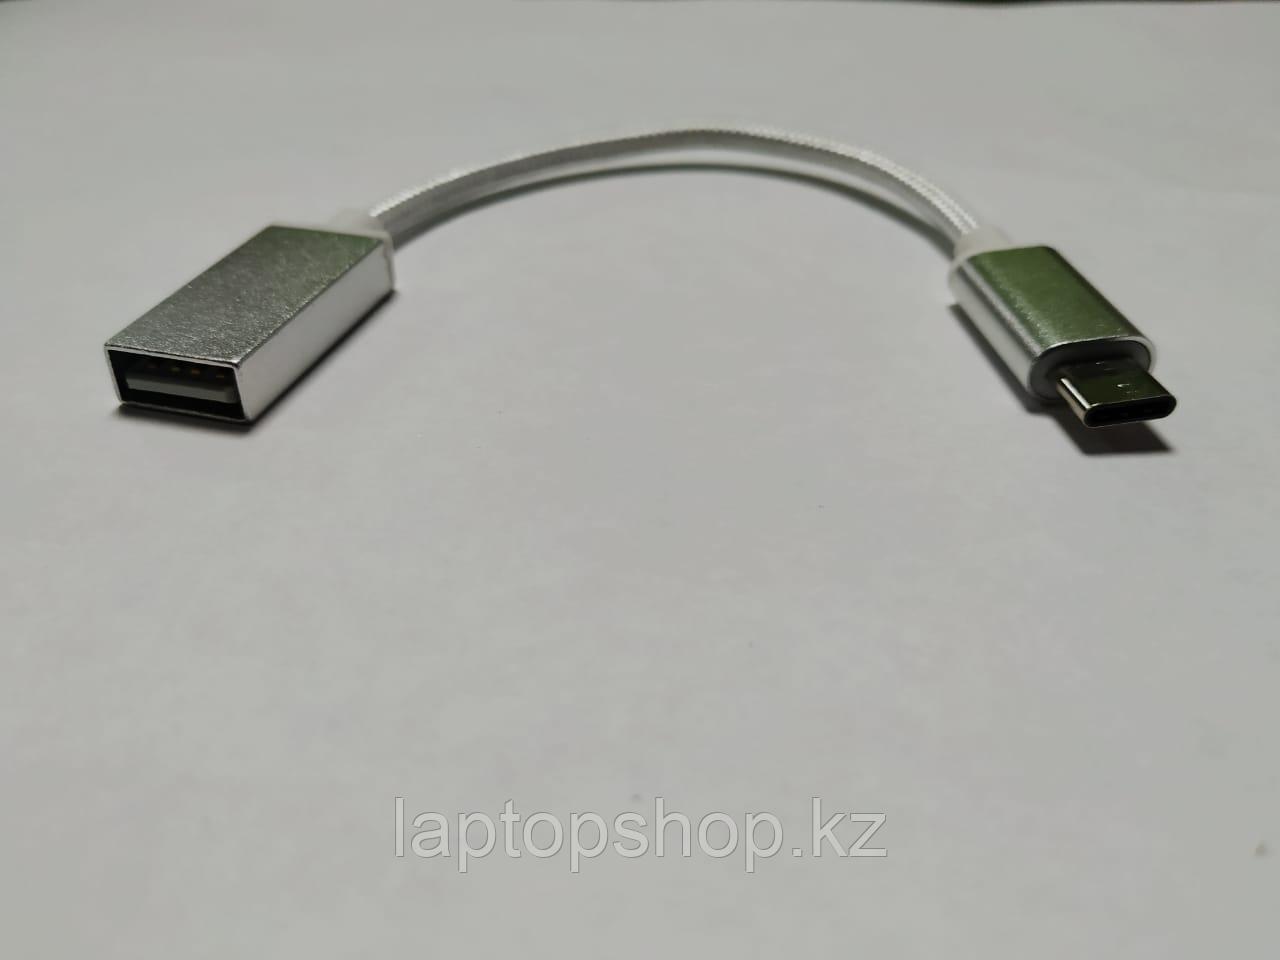 USB Type-C to USB 3.1 Cable Adapter White